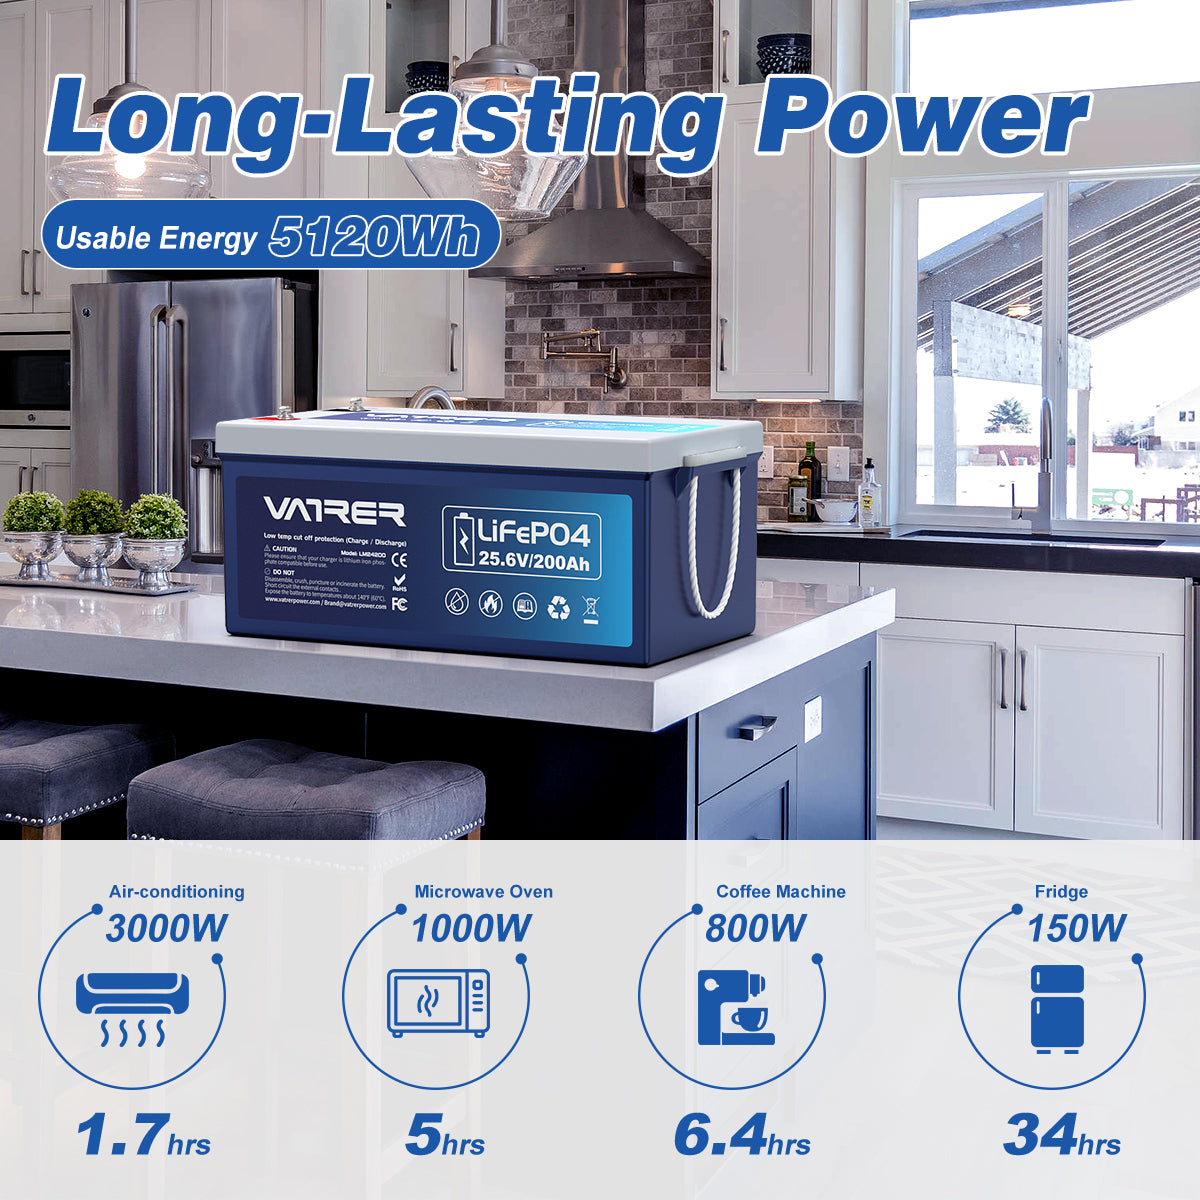 Chart of running time of appliances with different power of 24V 200Ah lithium battery